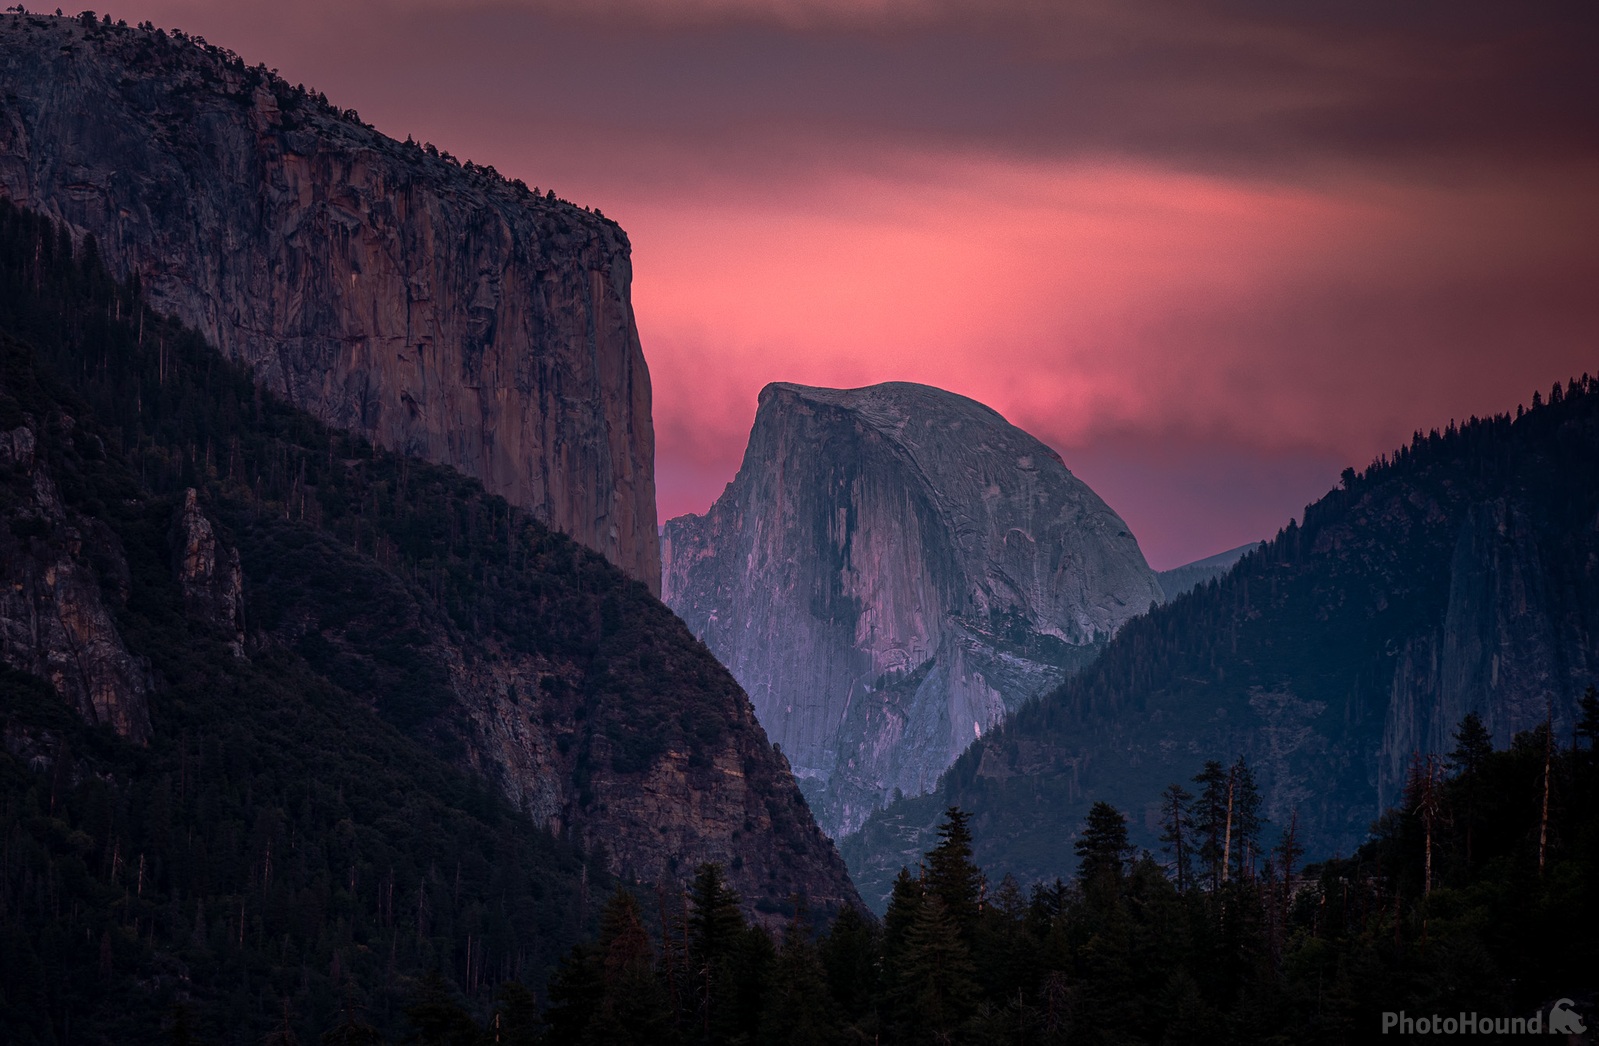 Image of Yosemite Valley (Tunnel View) by Charley Corace